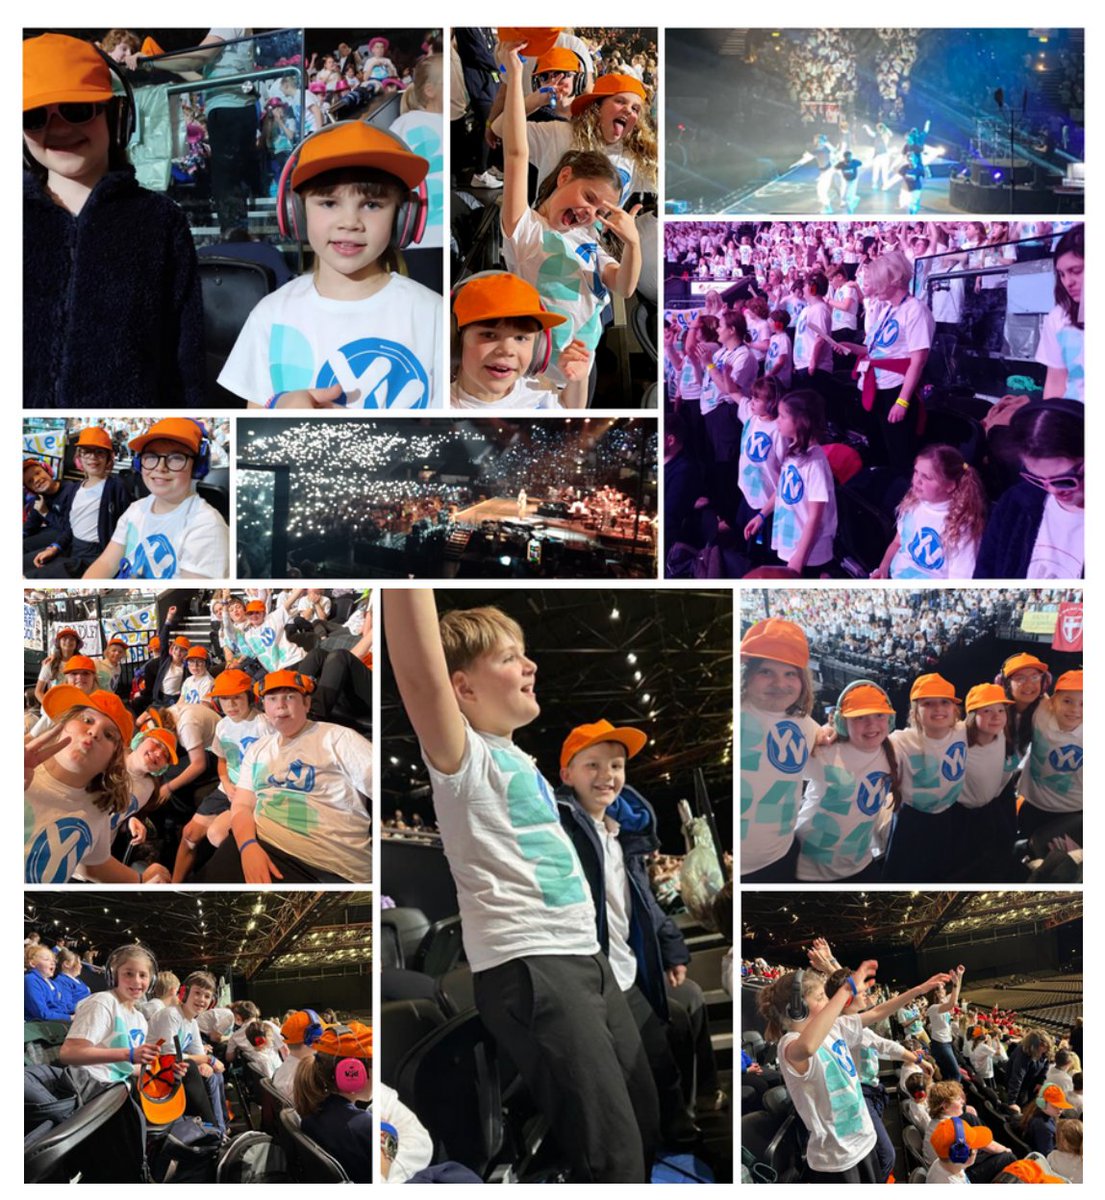 KS2 pupils had an amazing time at @YVconcerts  last week, where they sang and danced along to favourites from Moana and Matilda. 🎤🎶🕺#youngvoices #youngvoices24 #ks2trip #schooltrip #dyslexia #oxfordshireschools #dyslexiaschools